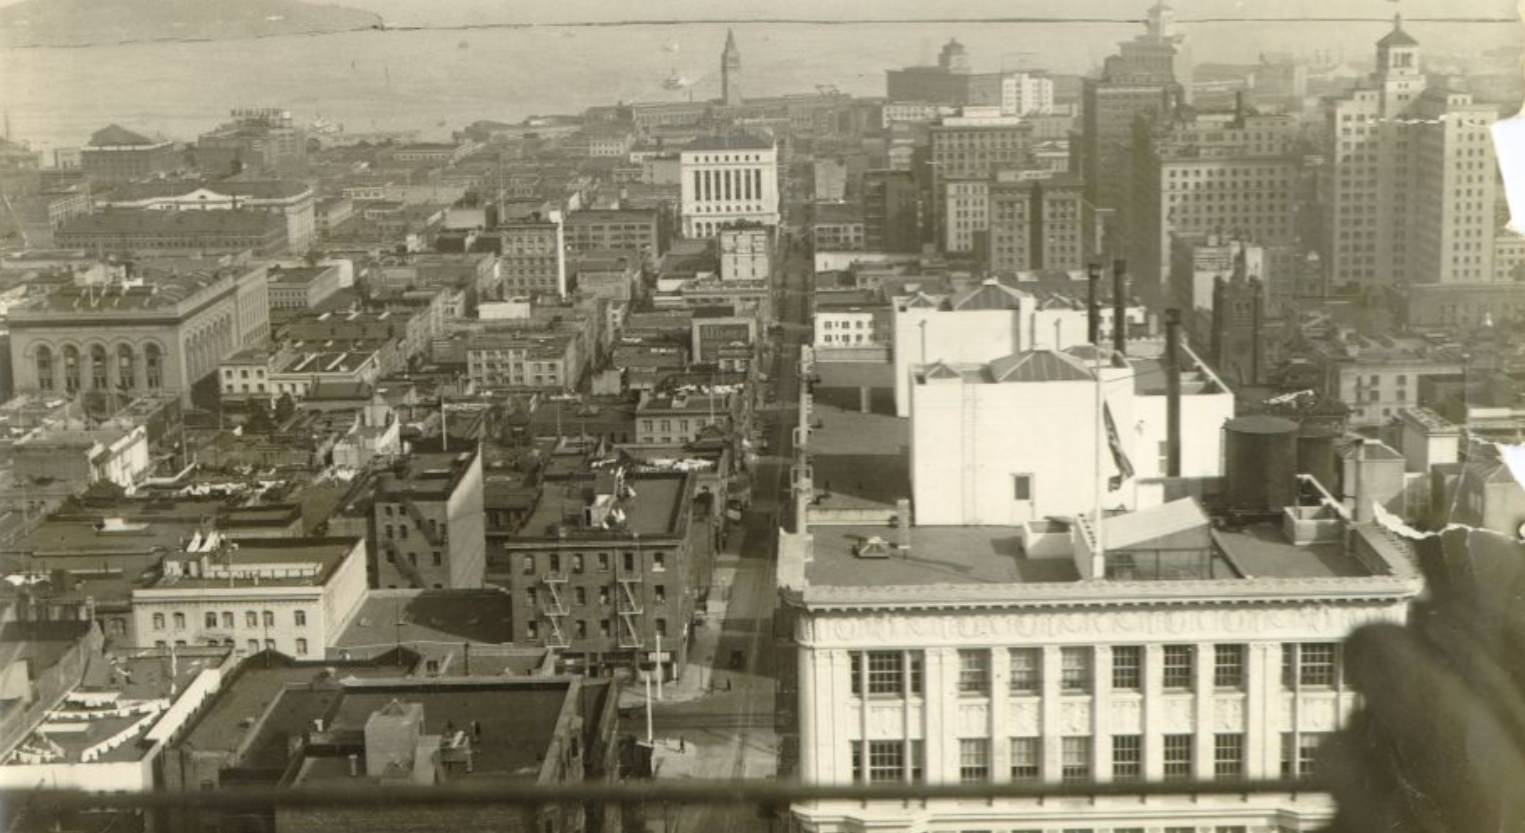 Aerial view of the city looking onto Sacramento Street, 1924